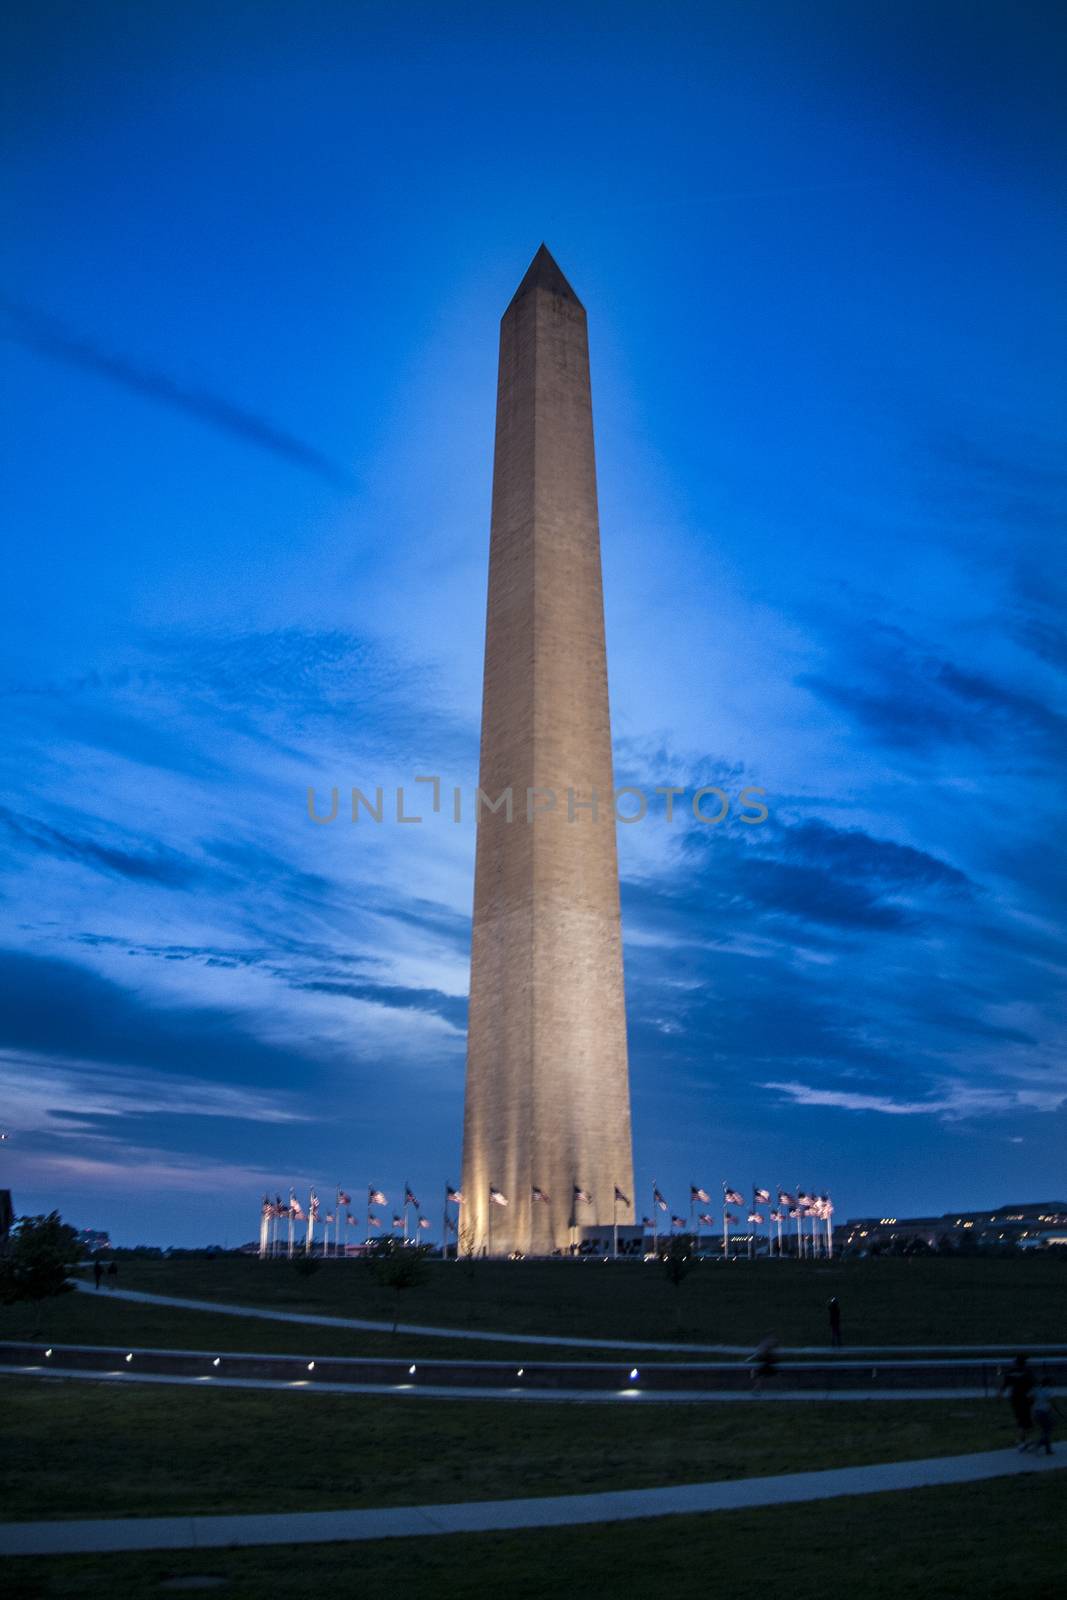 Washington Monument and circle of flags in the blue hour by tanaonte